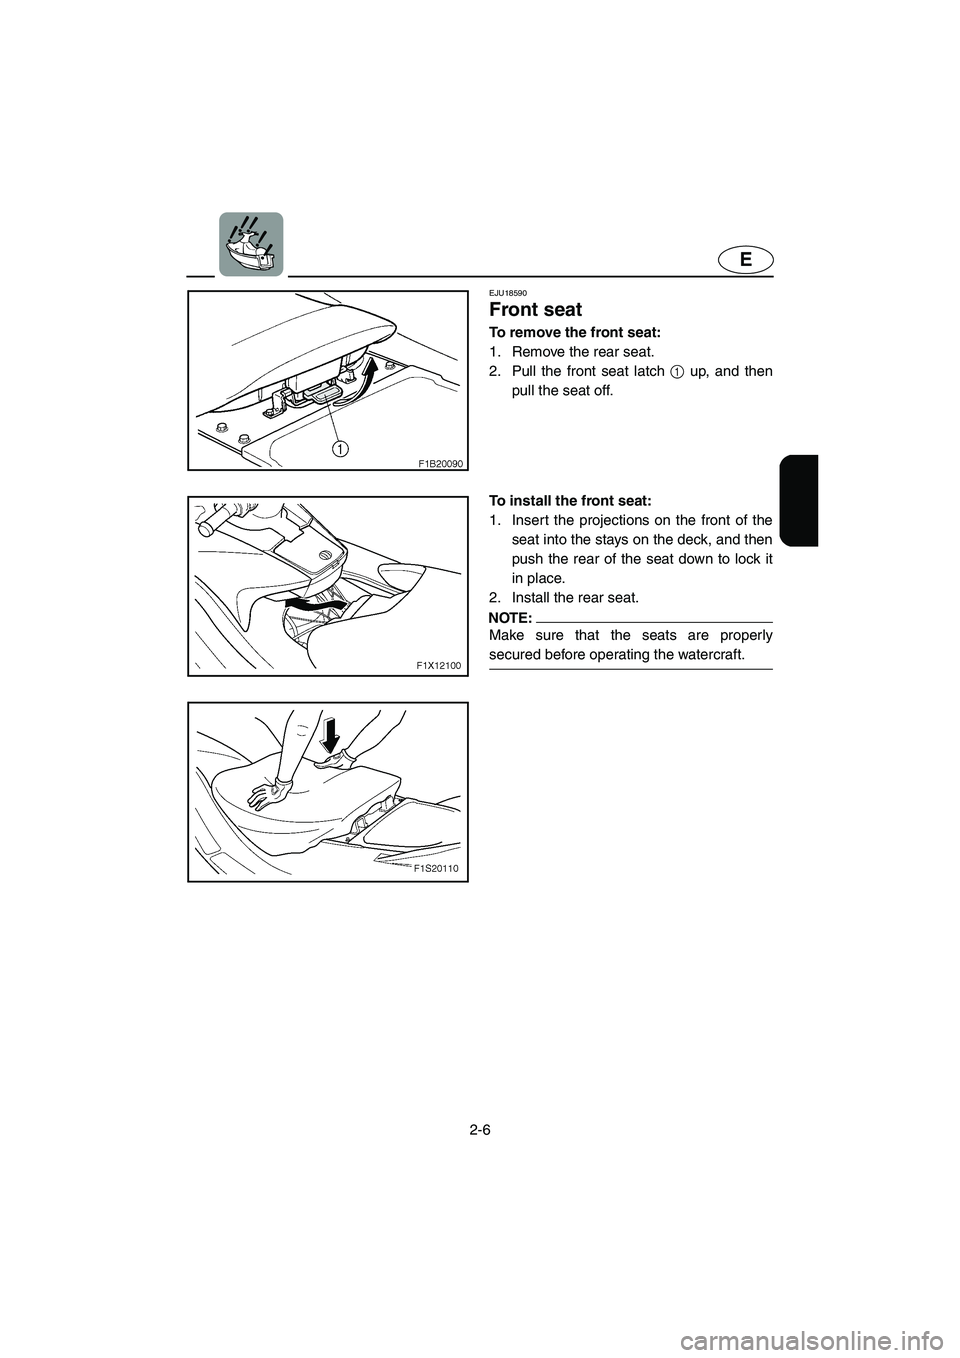 YAMAHA FX HO 2006 Owners Guide 2-6
E
EJU18590 
Front seat 
To remove the front seat:
1. Remove the rear seat. 
2. Pull the front seat latch 1 up, and then
pull the seat off.
To install the front seat:
1. Insert the projections on t